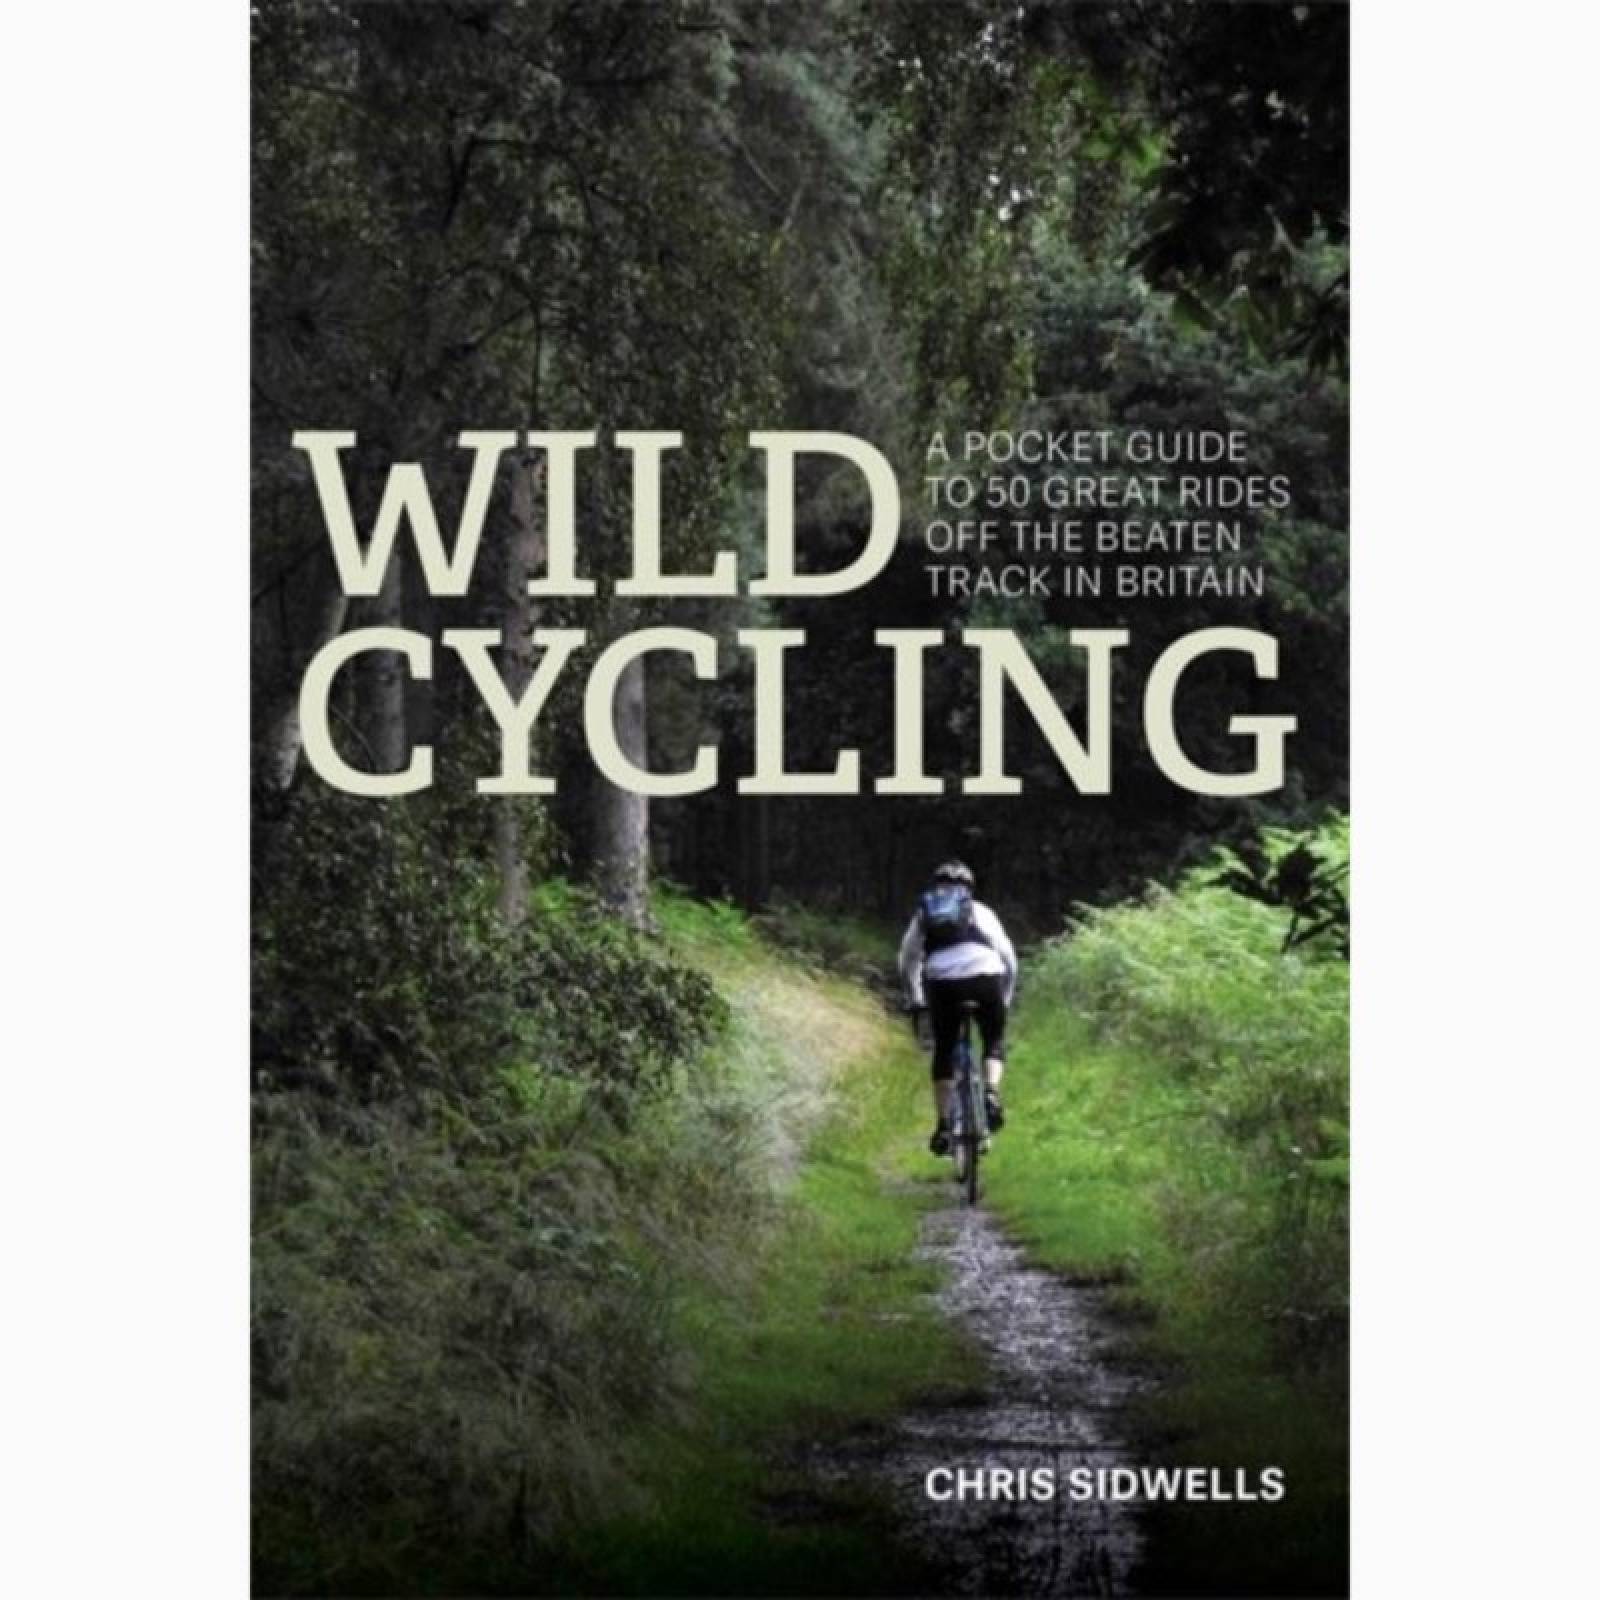 Wild Cycling By Chris Sidwells - Paperback Book